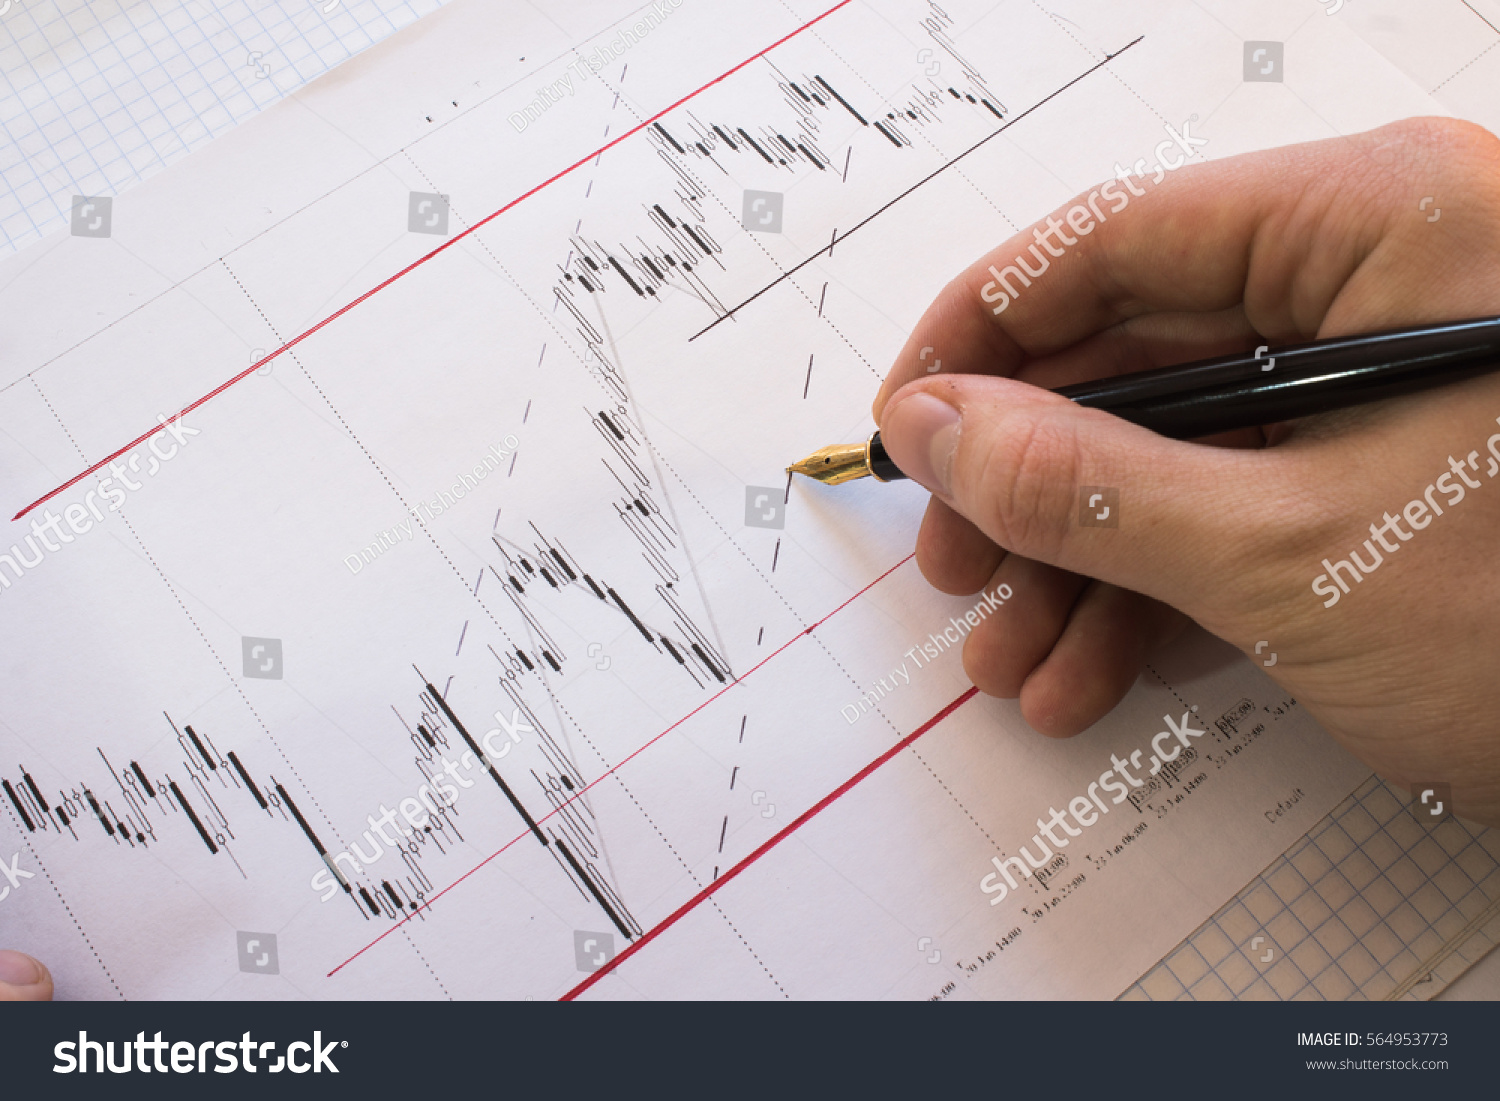 Stock Market Chart On Forex Charts Stock Photo Edit Now 564953773 - 